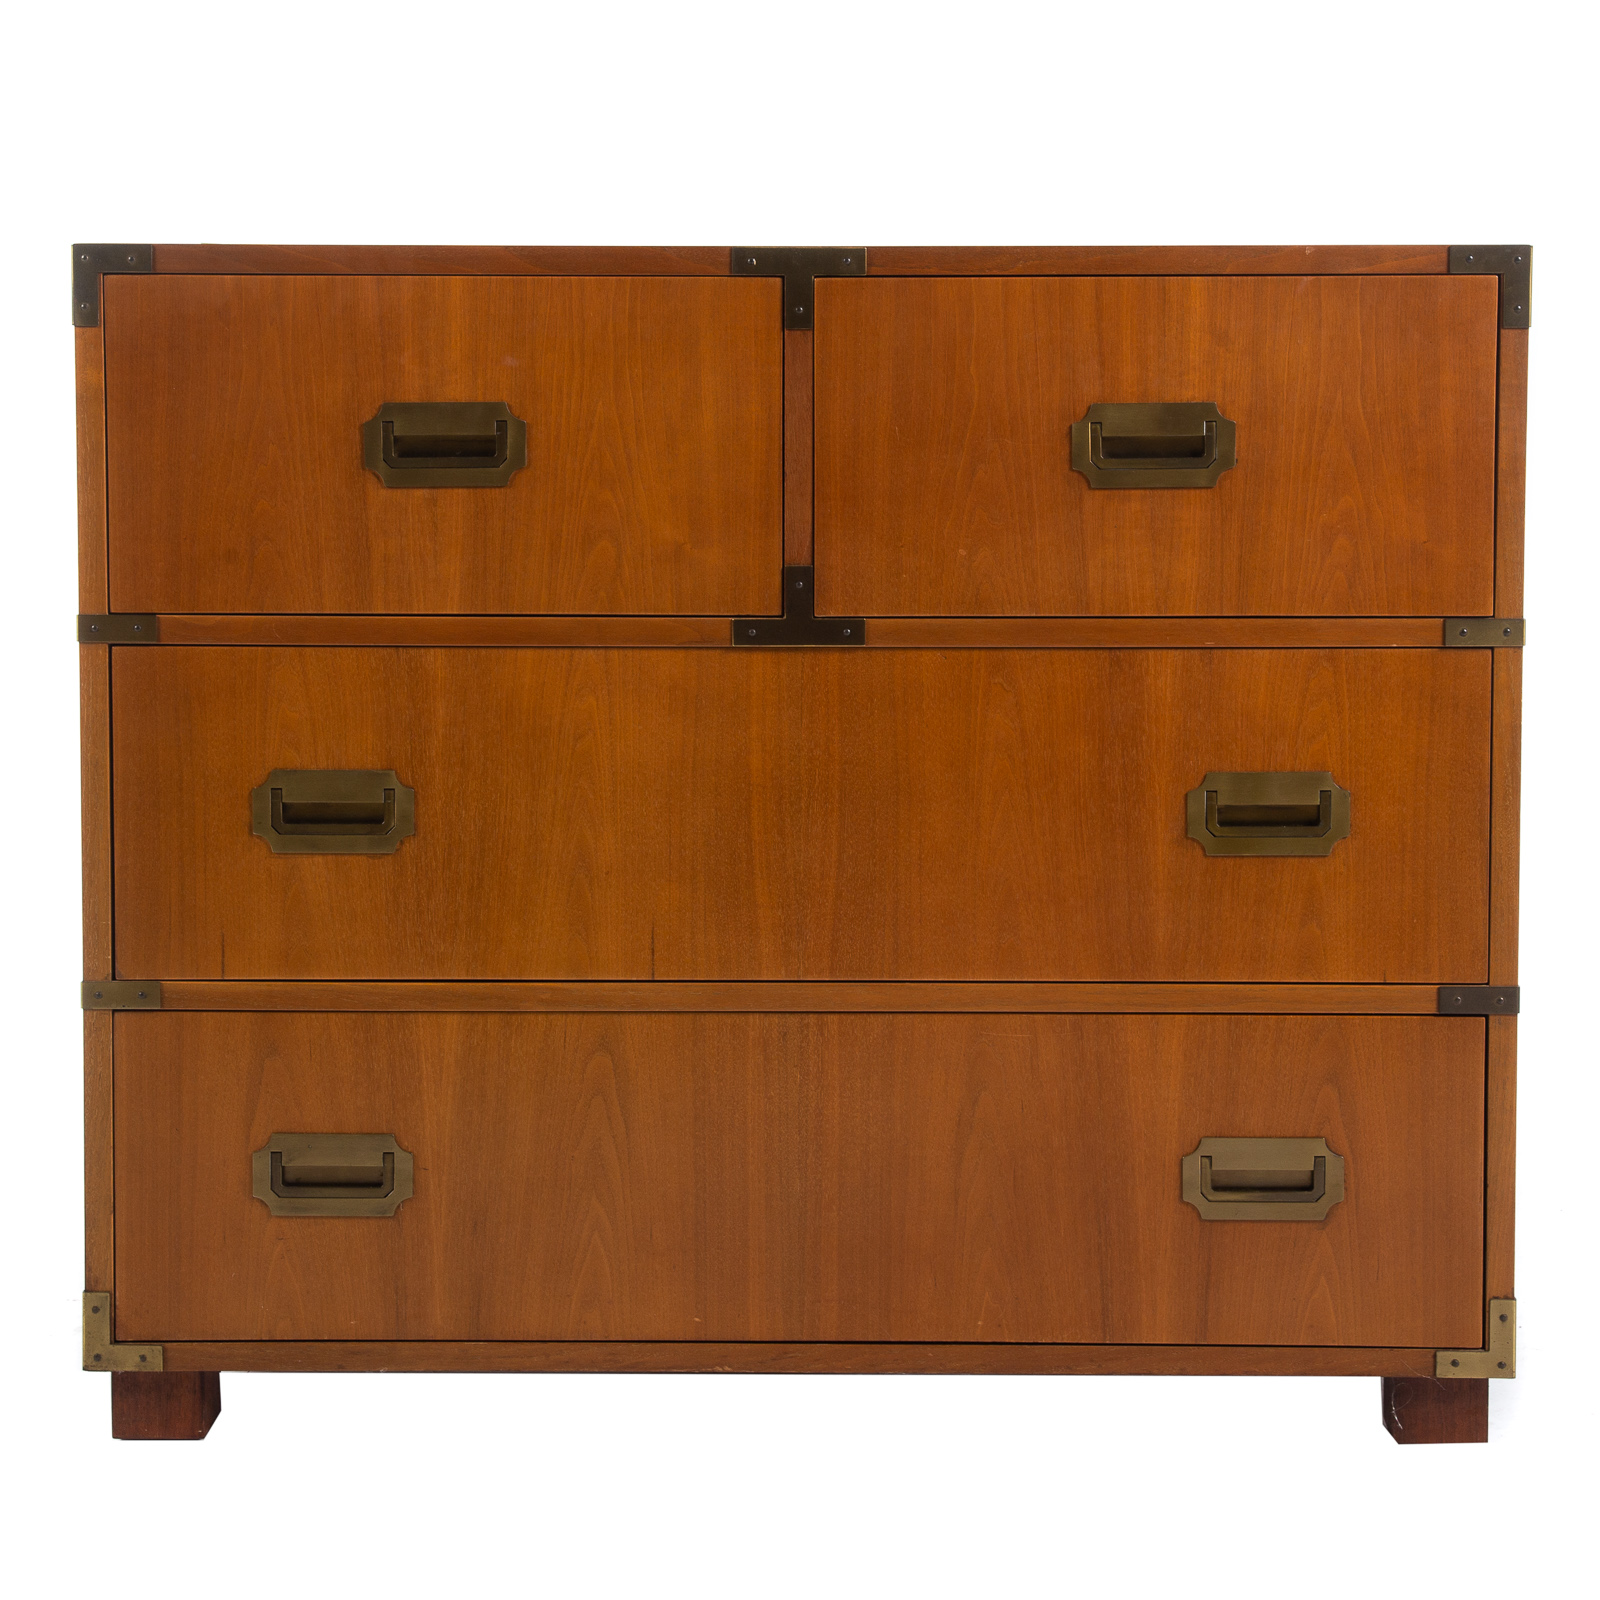 BAKER CAMPAIGN STYLE CHEST Brass 287266